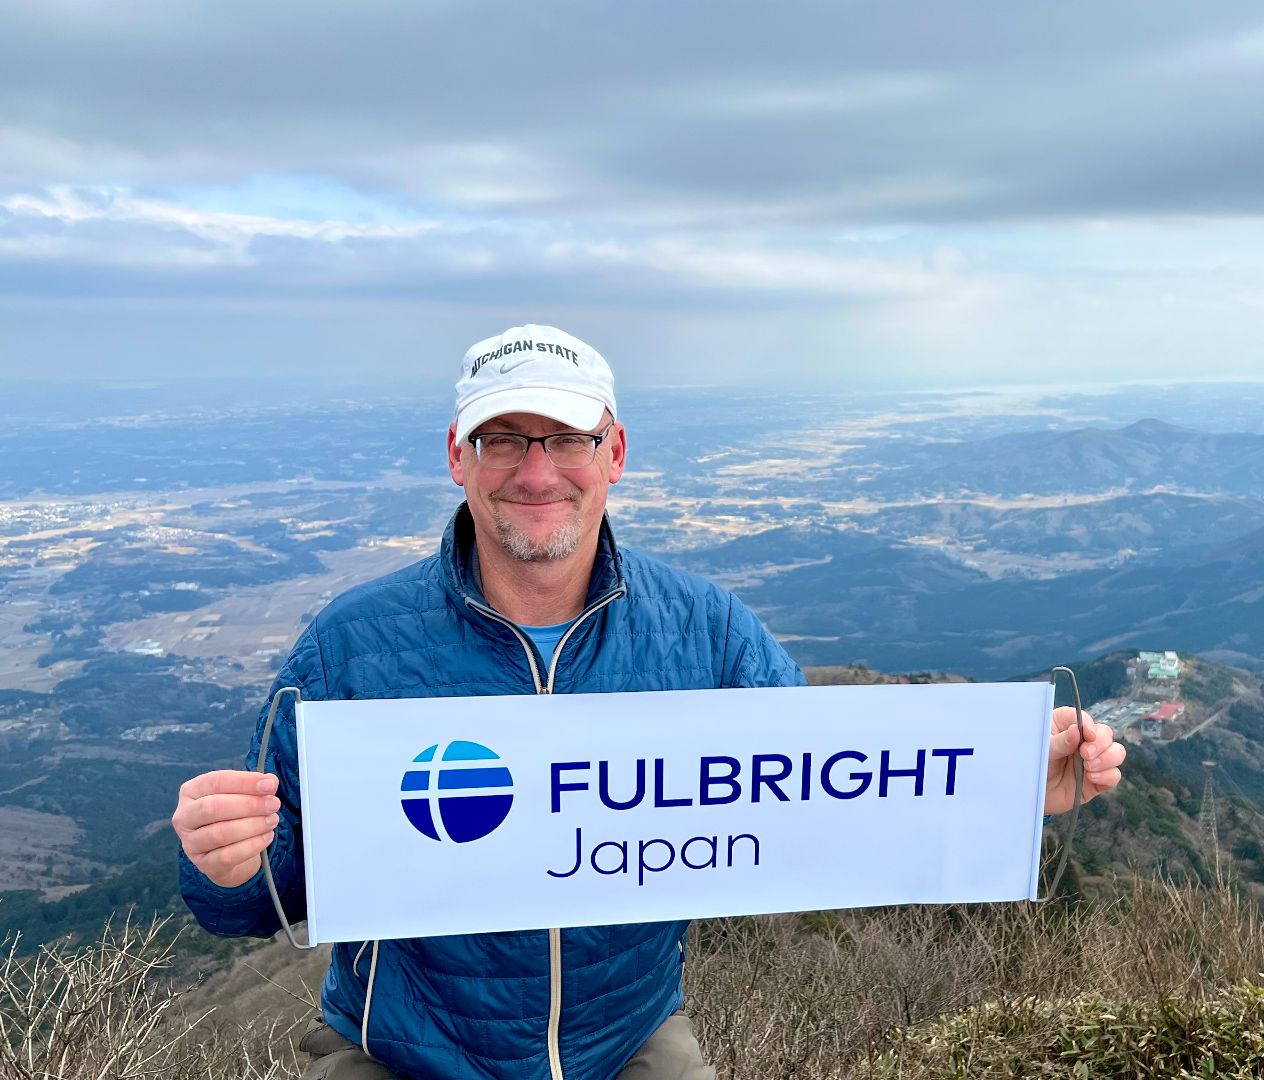 A man in a white Michigan State ball cap, glasses, blue jacket stands on top of a mountain with an expansive landscape below. He holds a rectangular white banner with “Fulbright Japan” printed on it. 